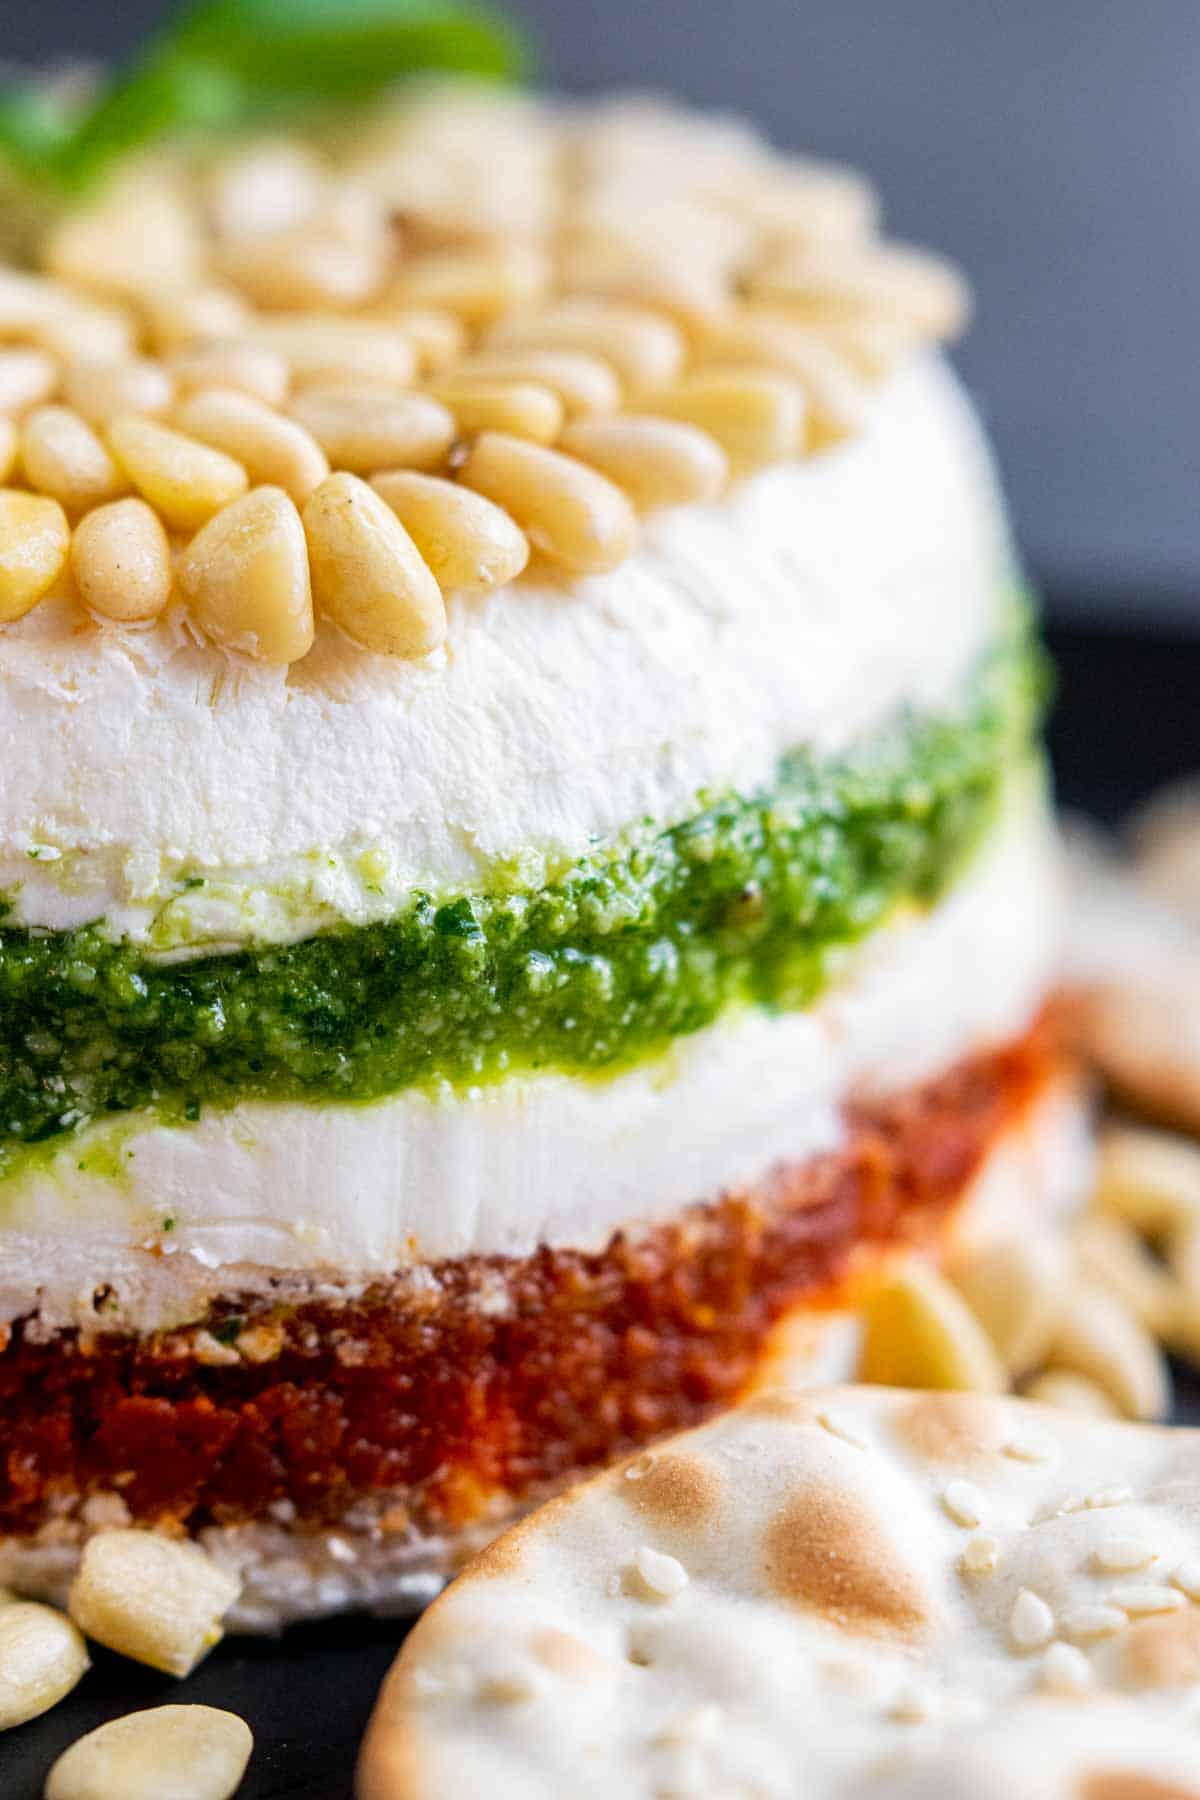 Pesto Cream Cheese Spread layers garnished with pine nuts on top